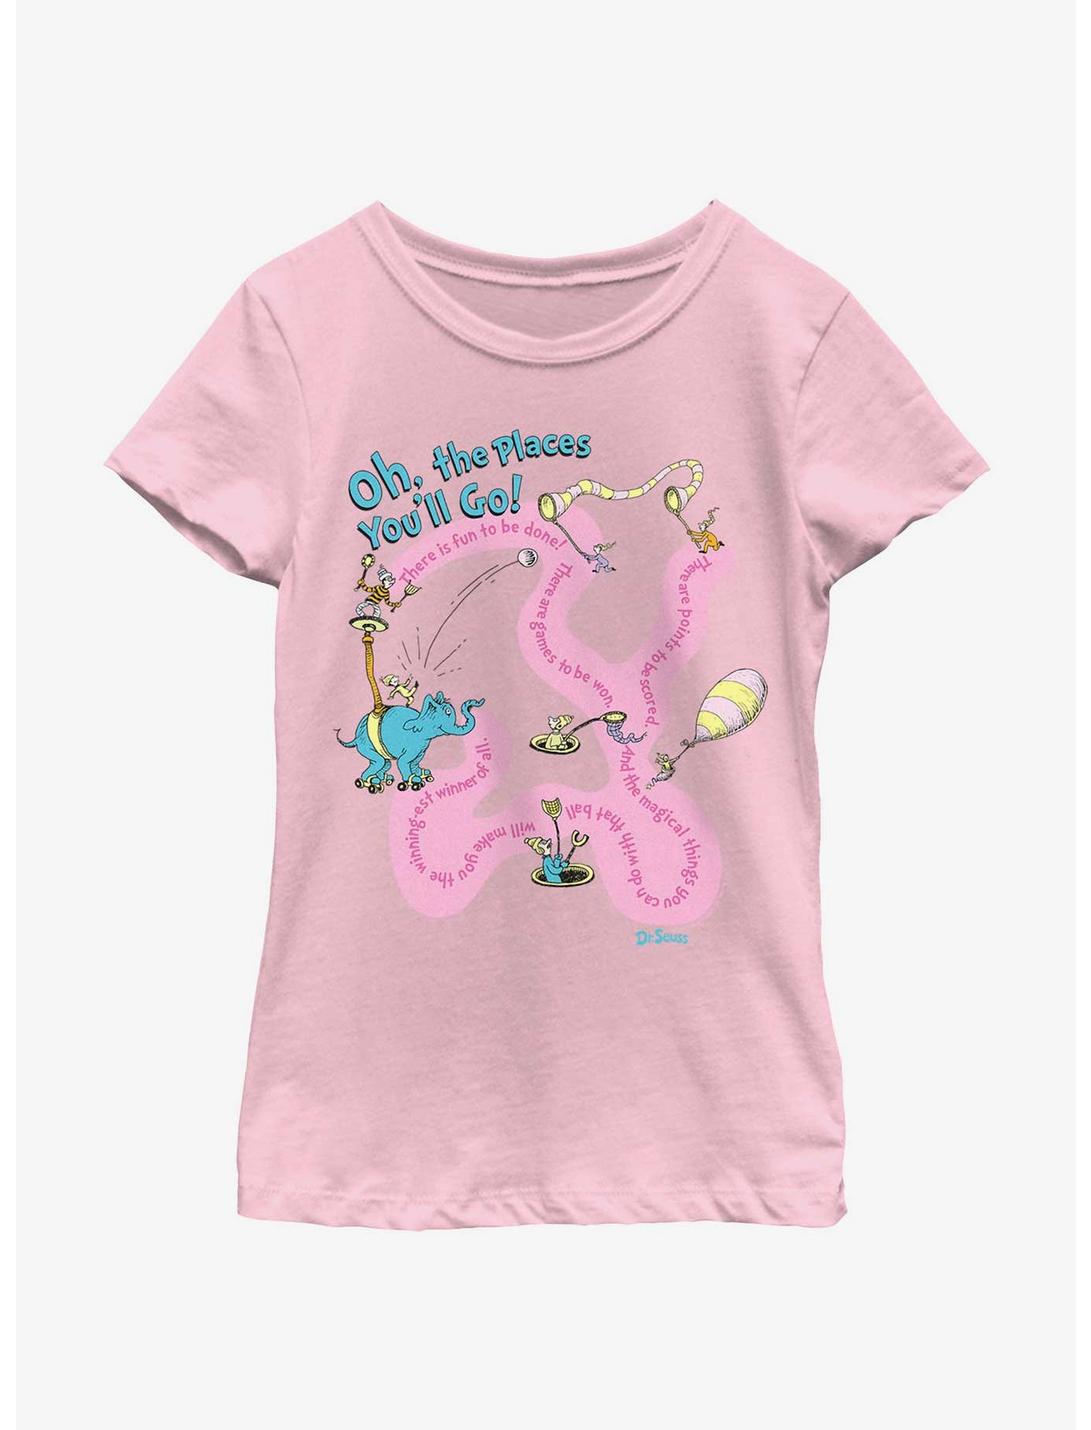 Dr. Seuss Journeying The Places You'll Go Youth Girls T-Shirt, PINK, hi-res